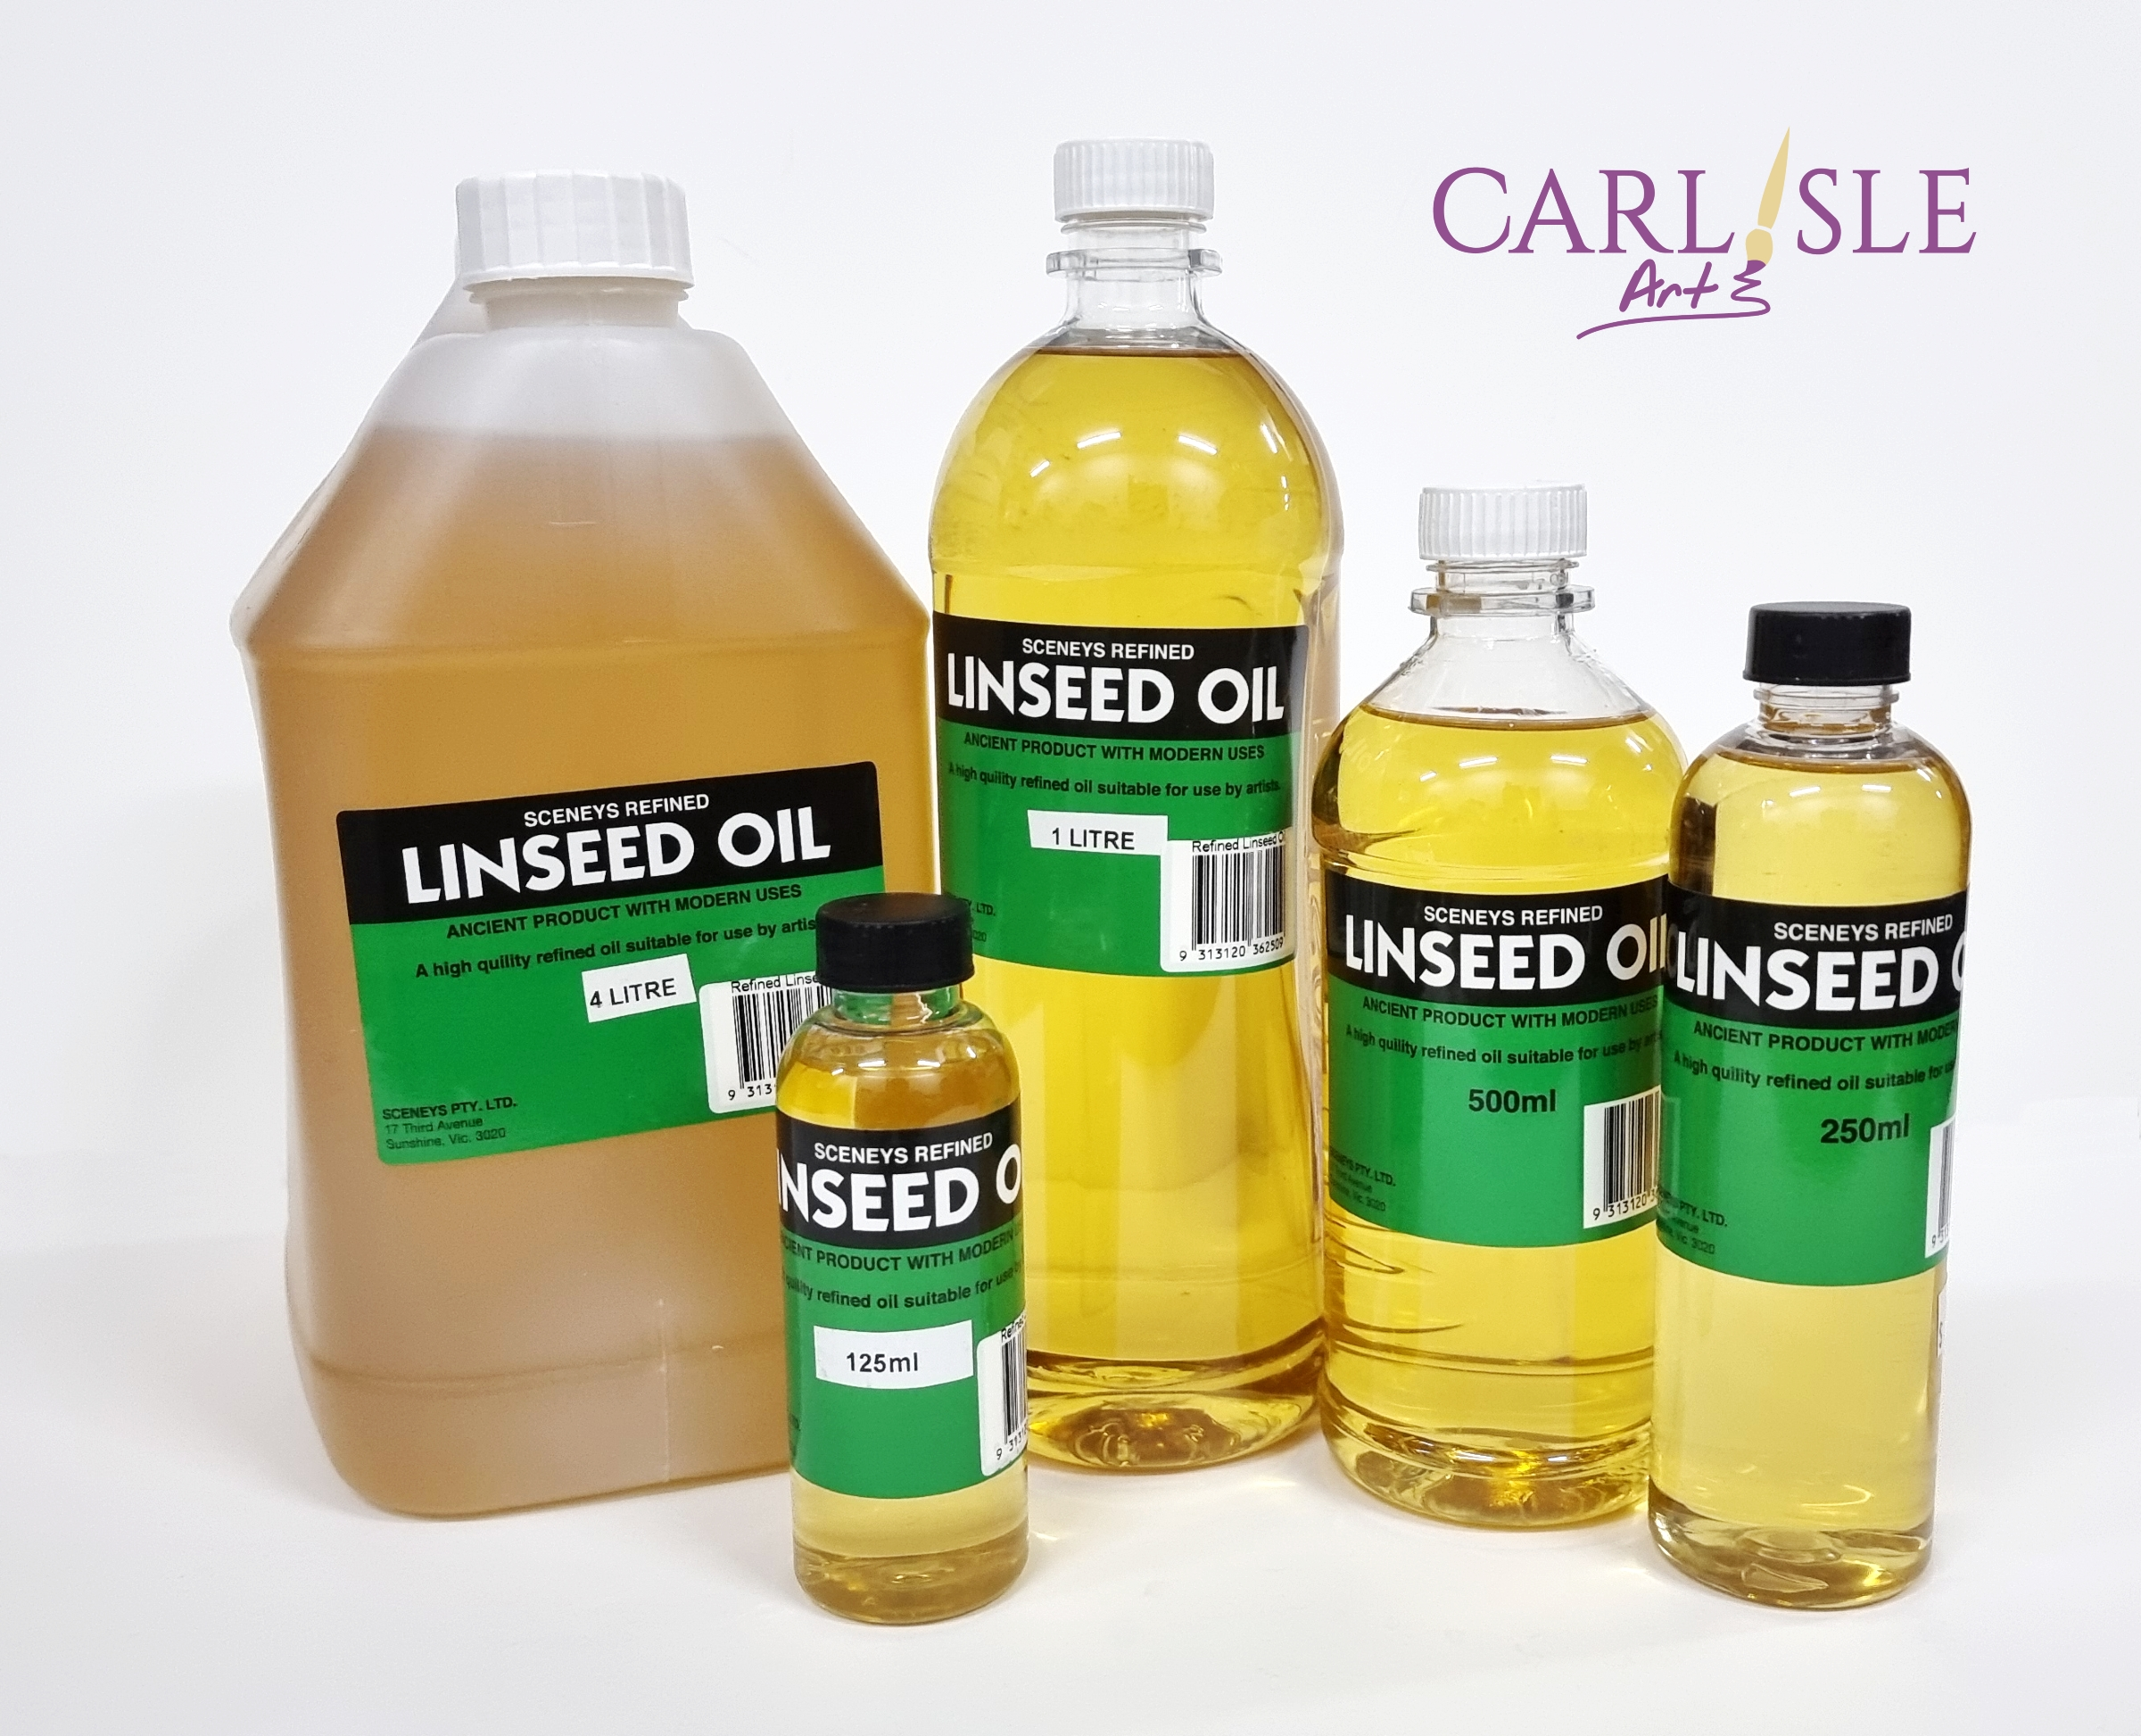 Sceneys Refined Linseed Oil - Choose Your Size